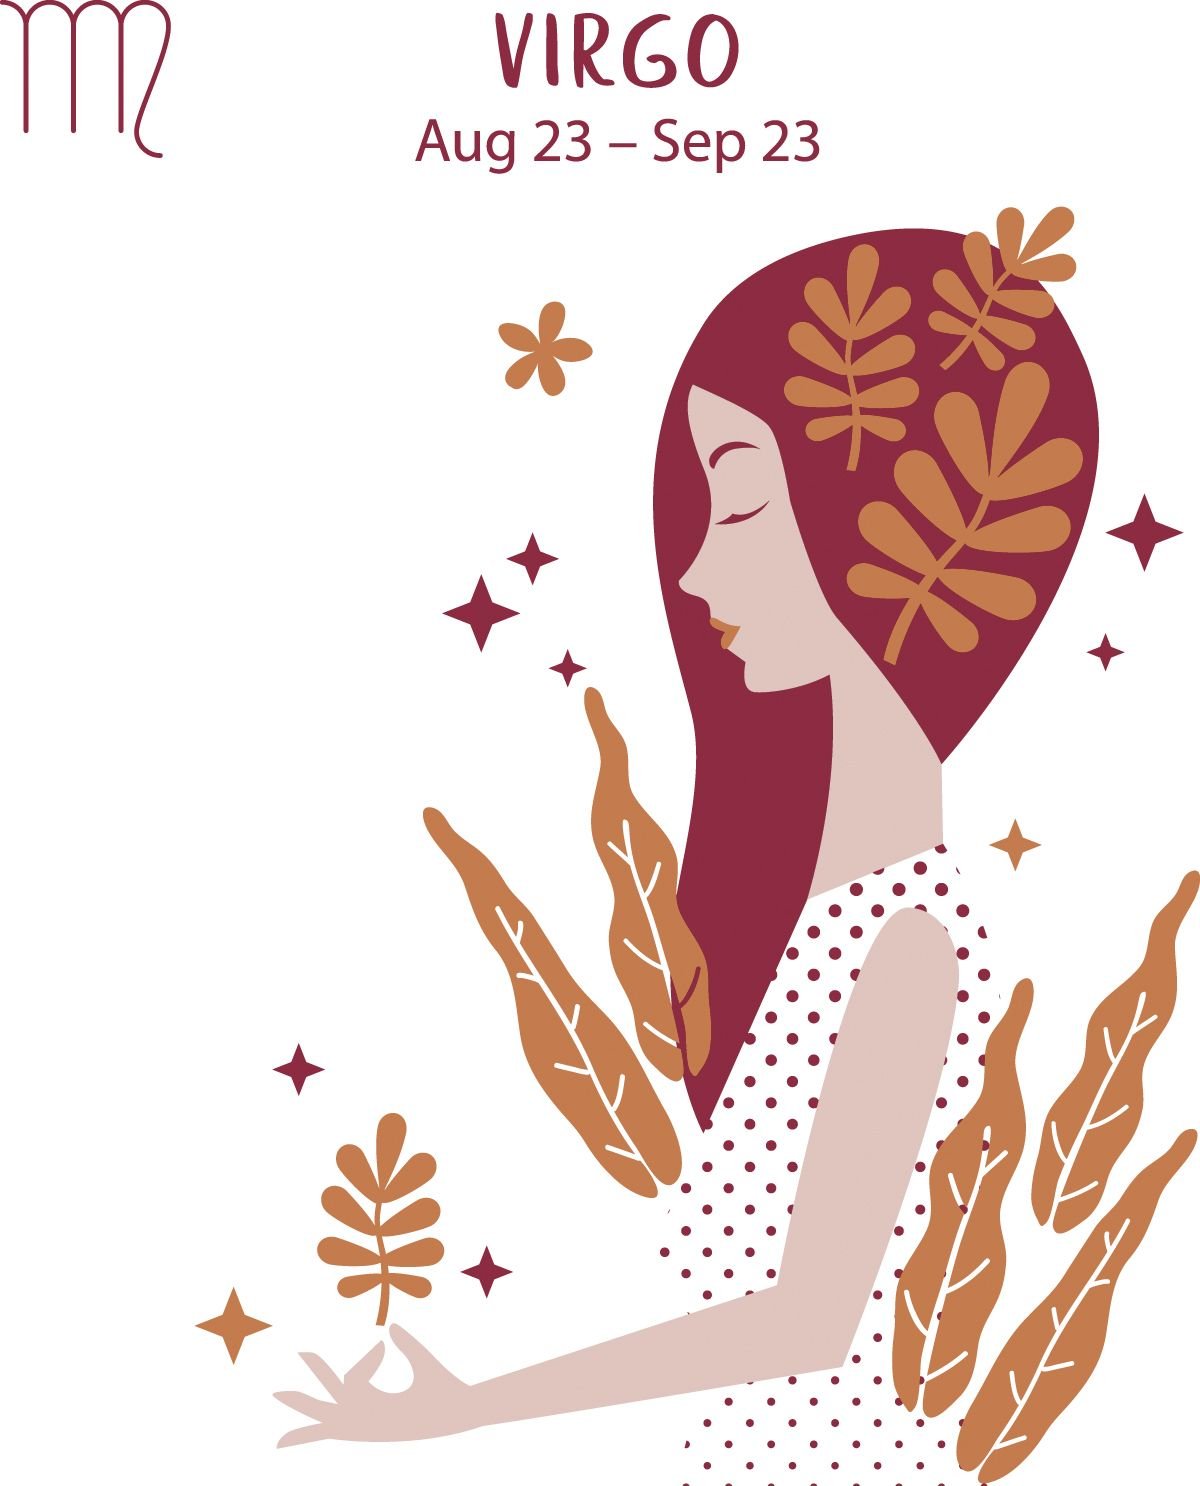 Virgo (Aug 23 - Sep 23) represented by a woman surrounded by greenery. 